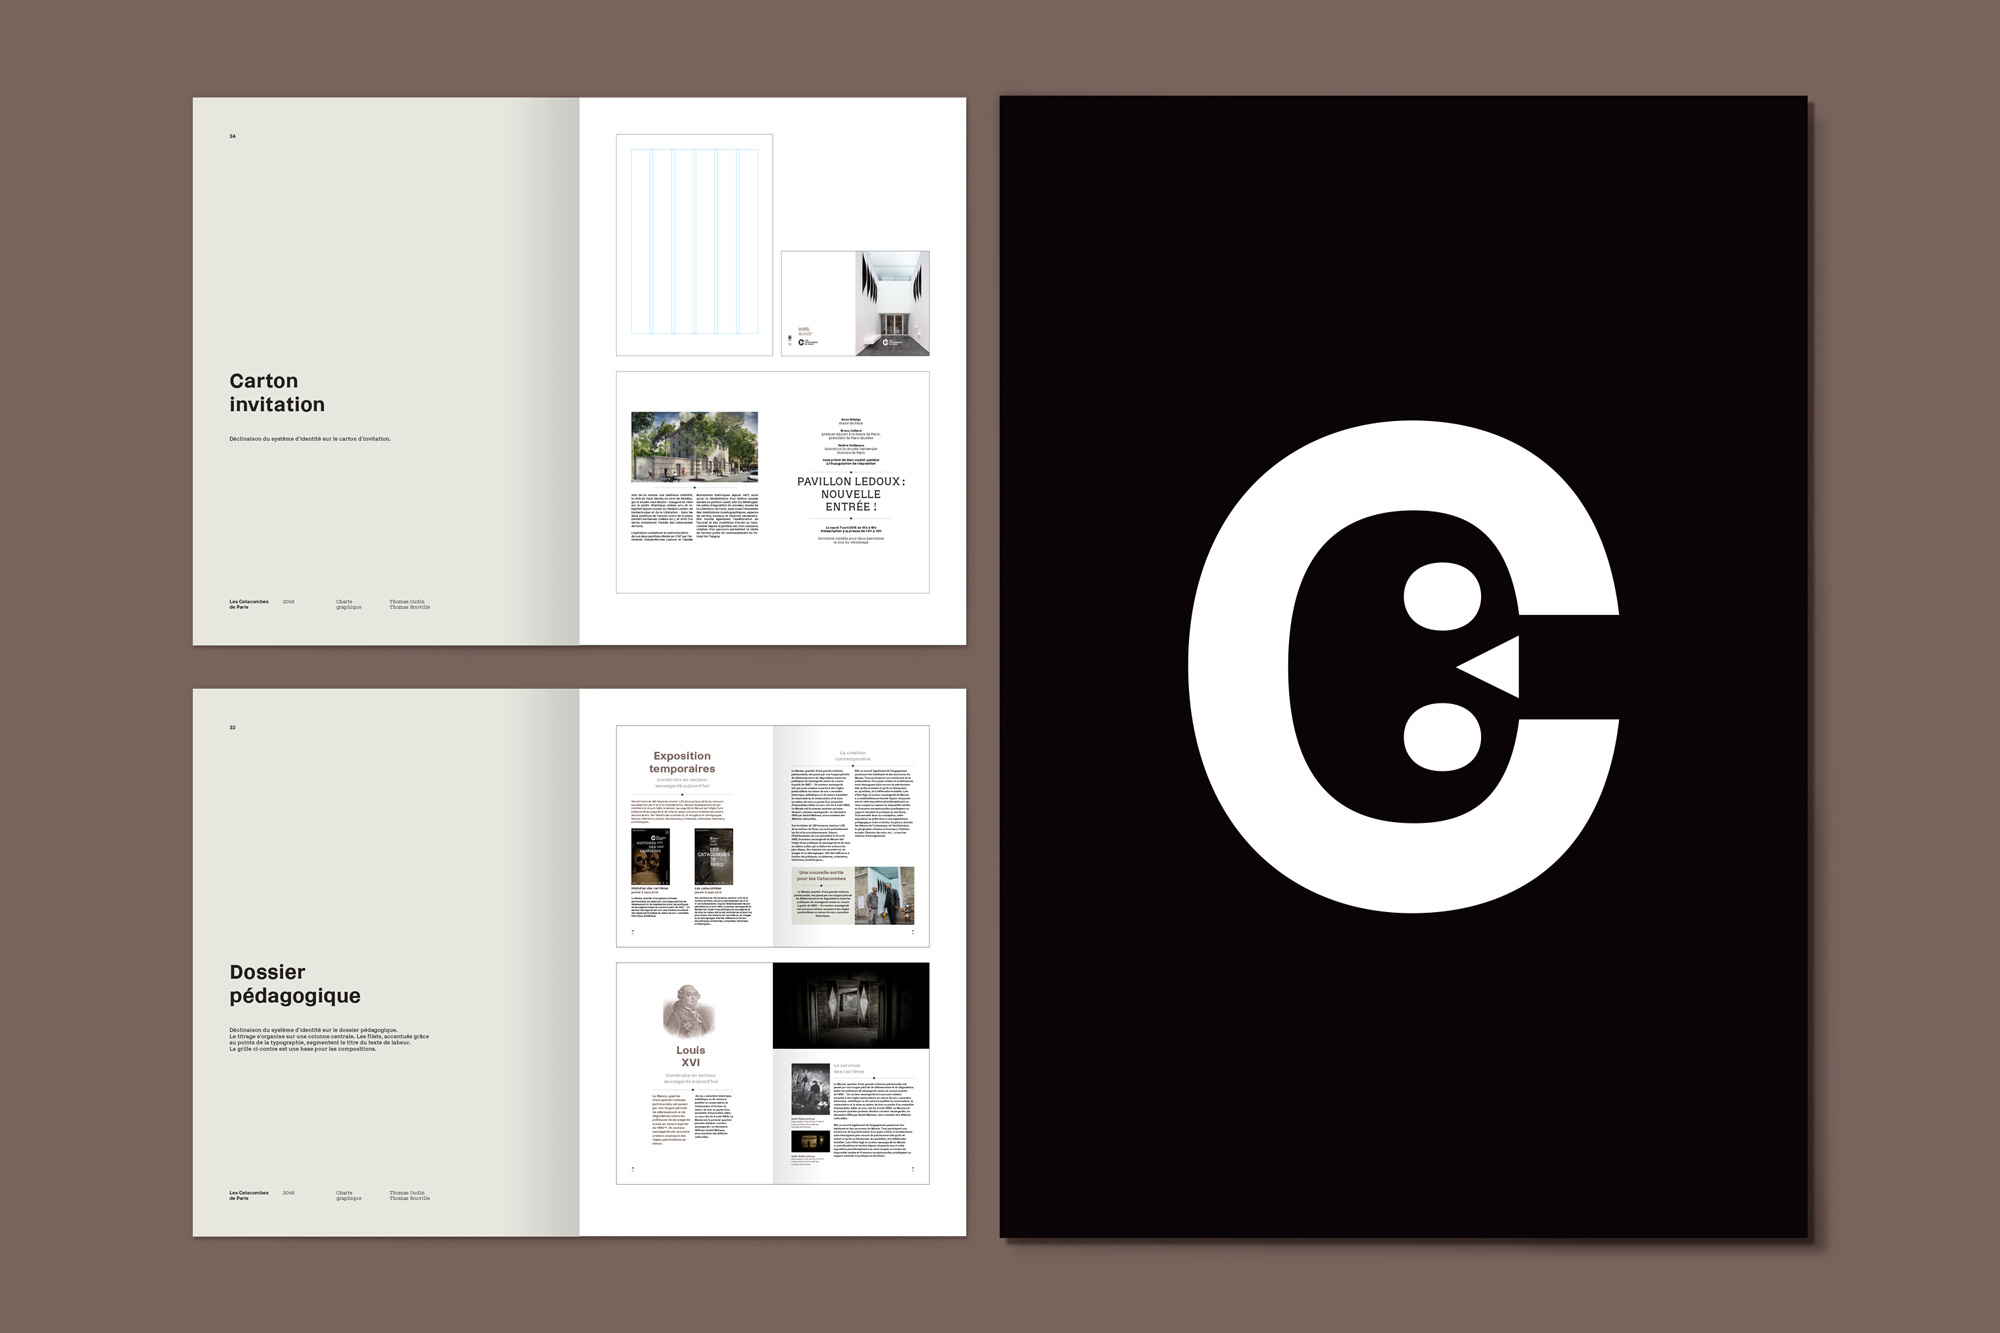 New Logo and Identity for Catacombes de Paris by Mo-To